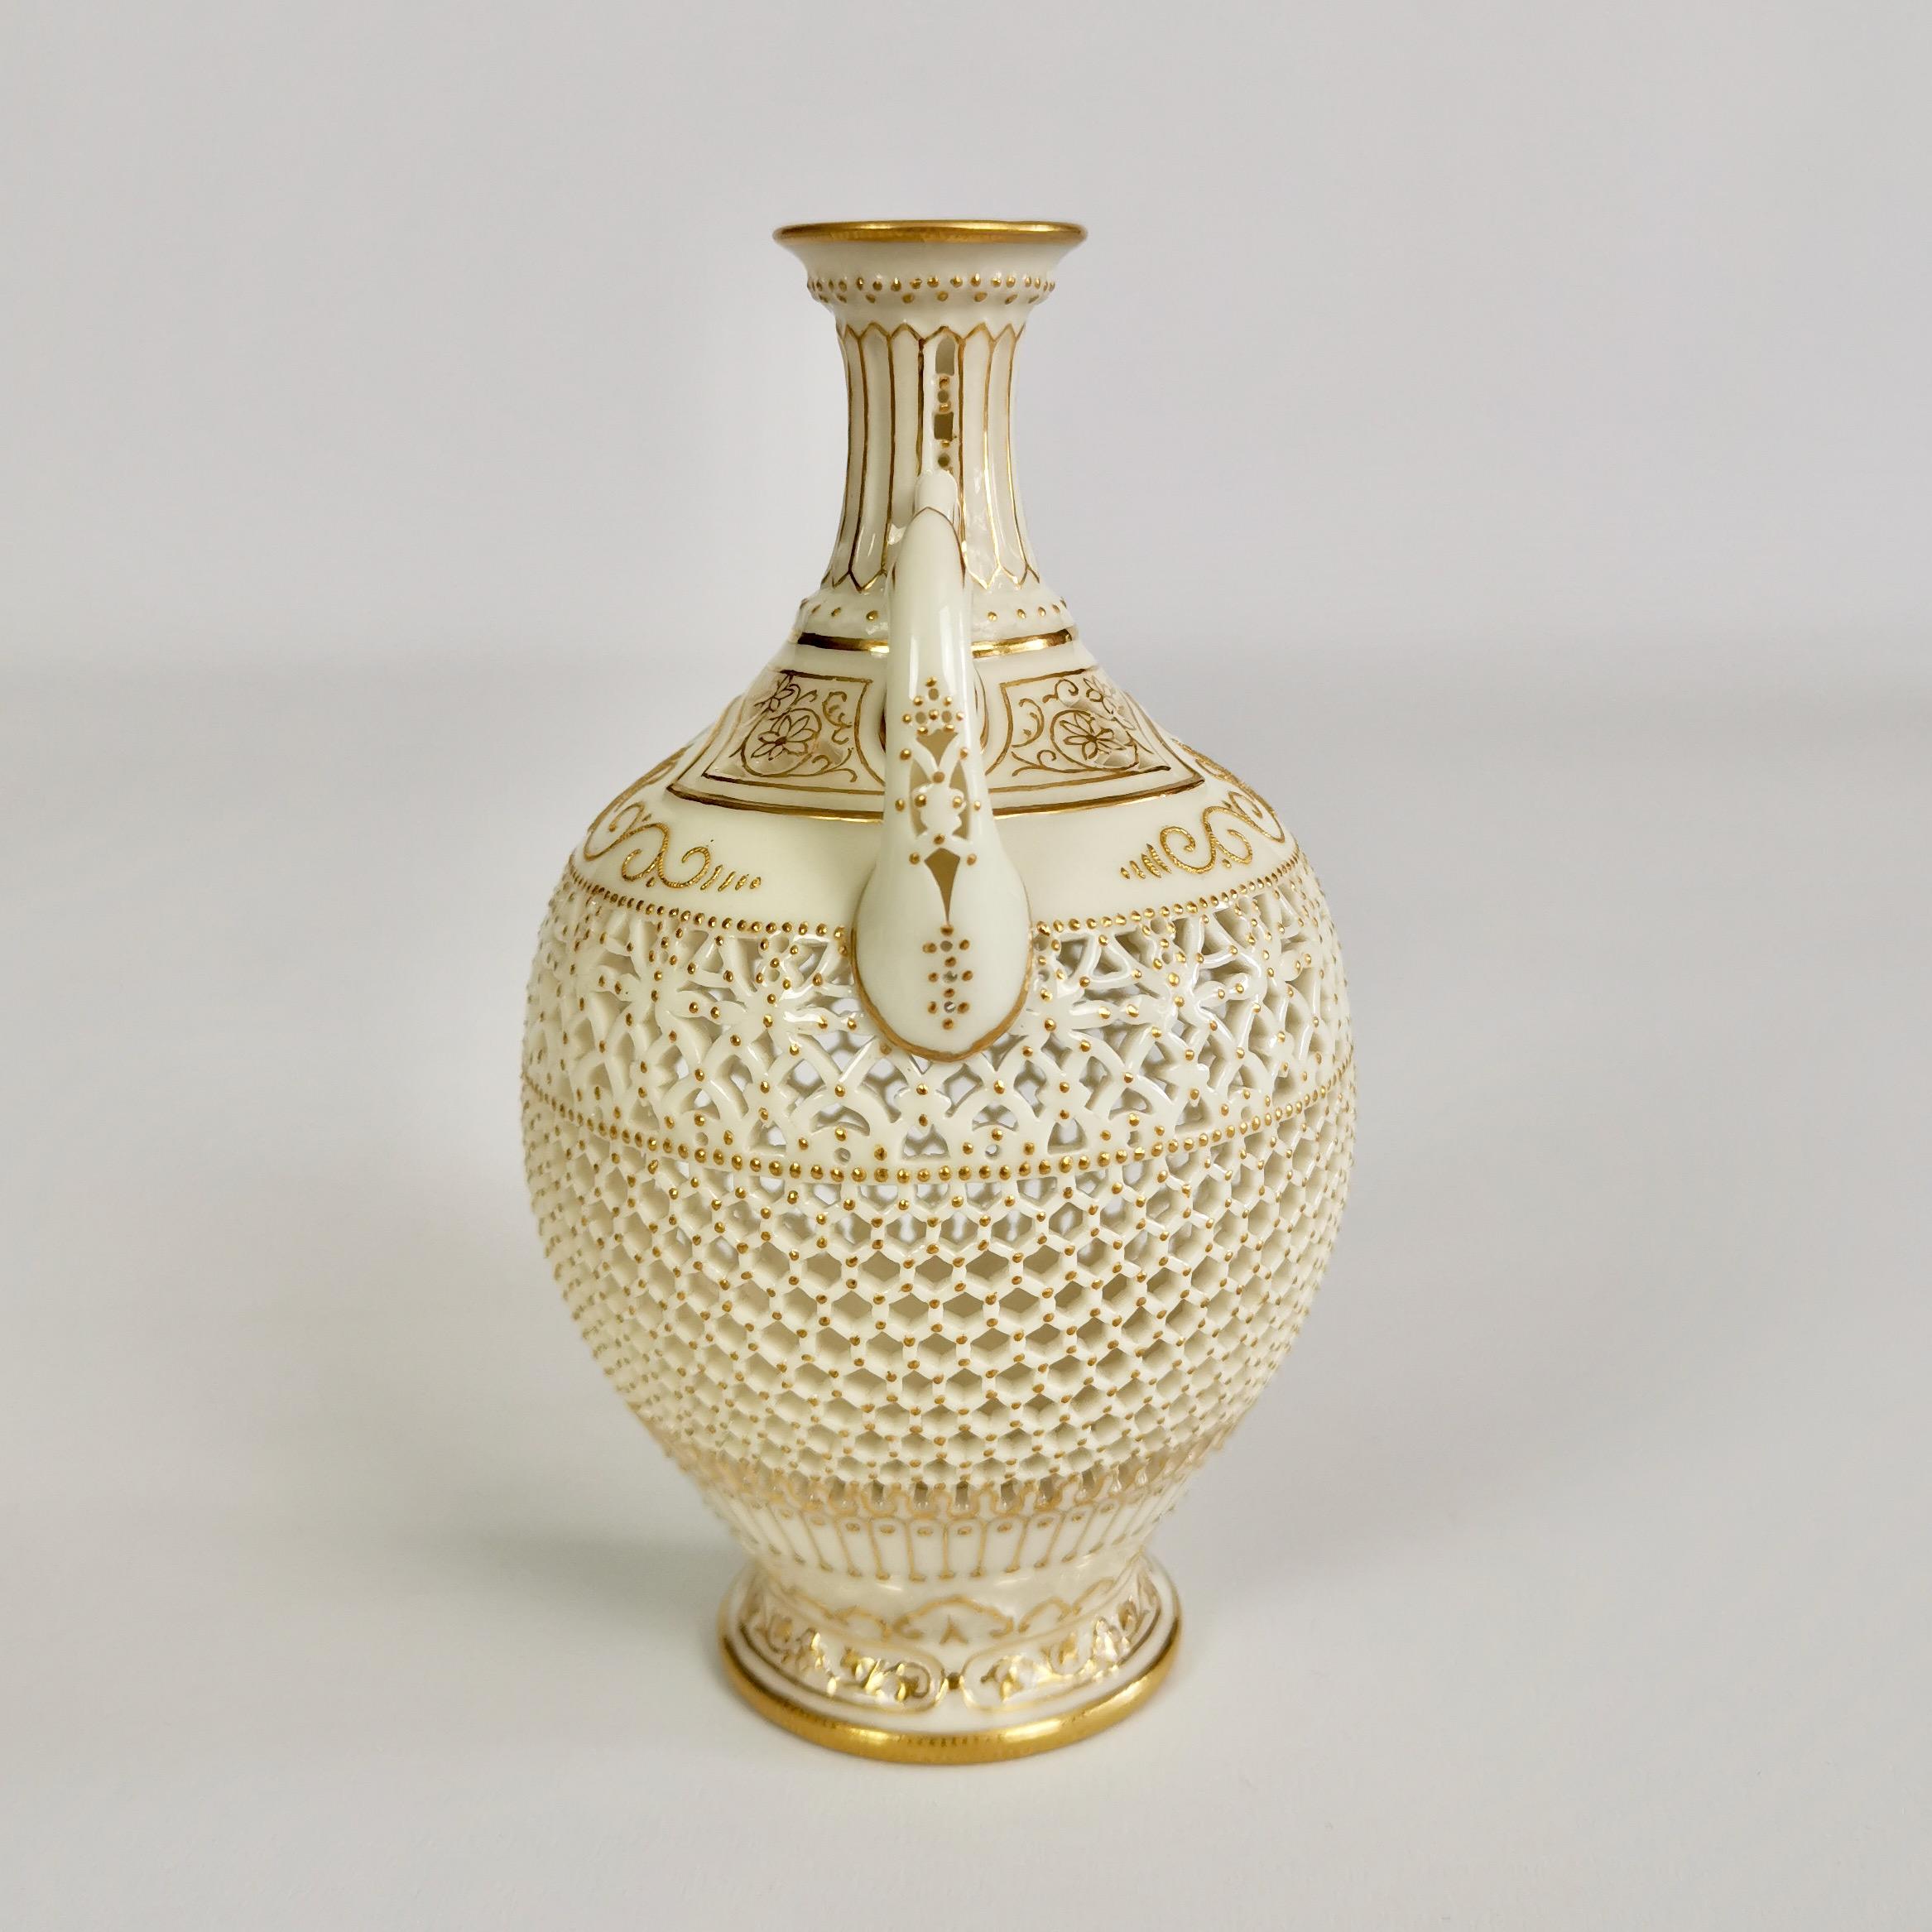 English Royal Worcester Small Persian Porcelain Vase, Reticulated George Owen, 1917